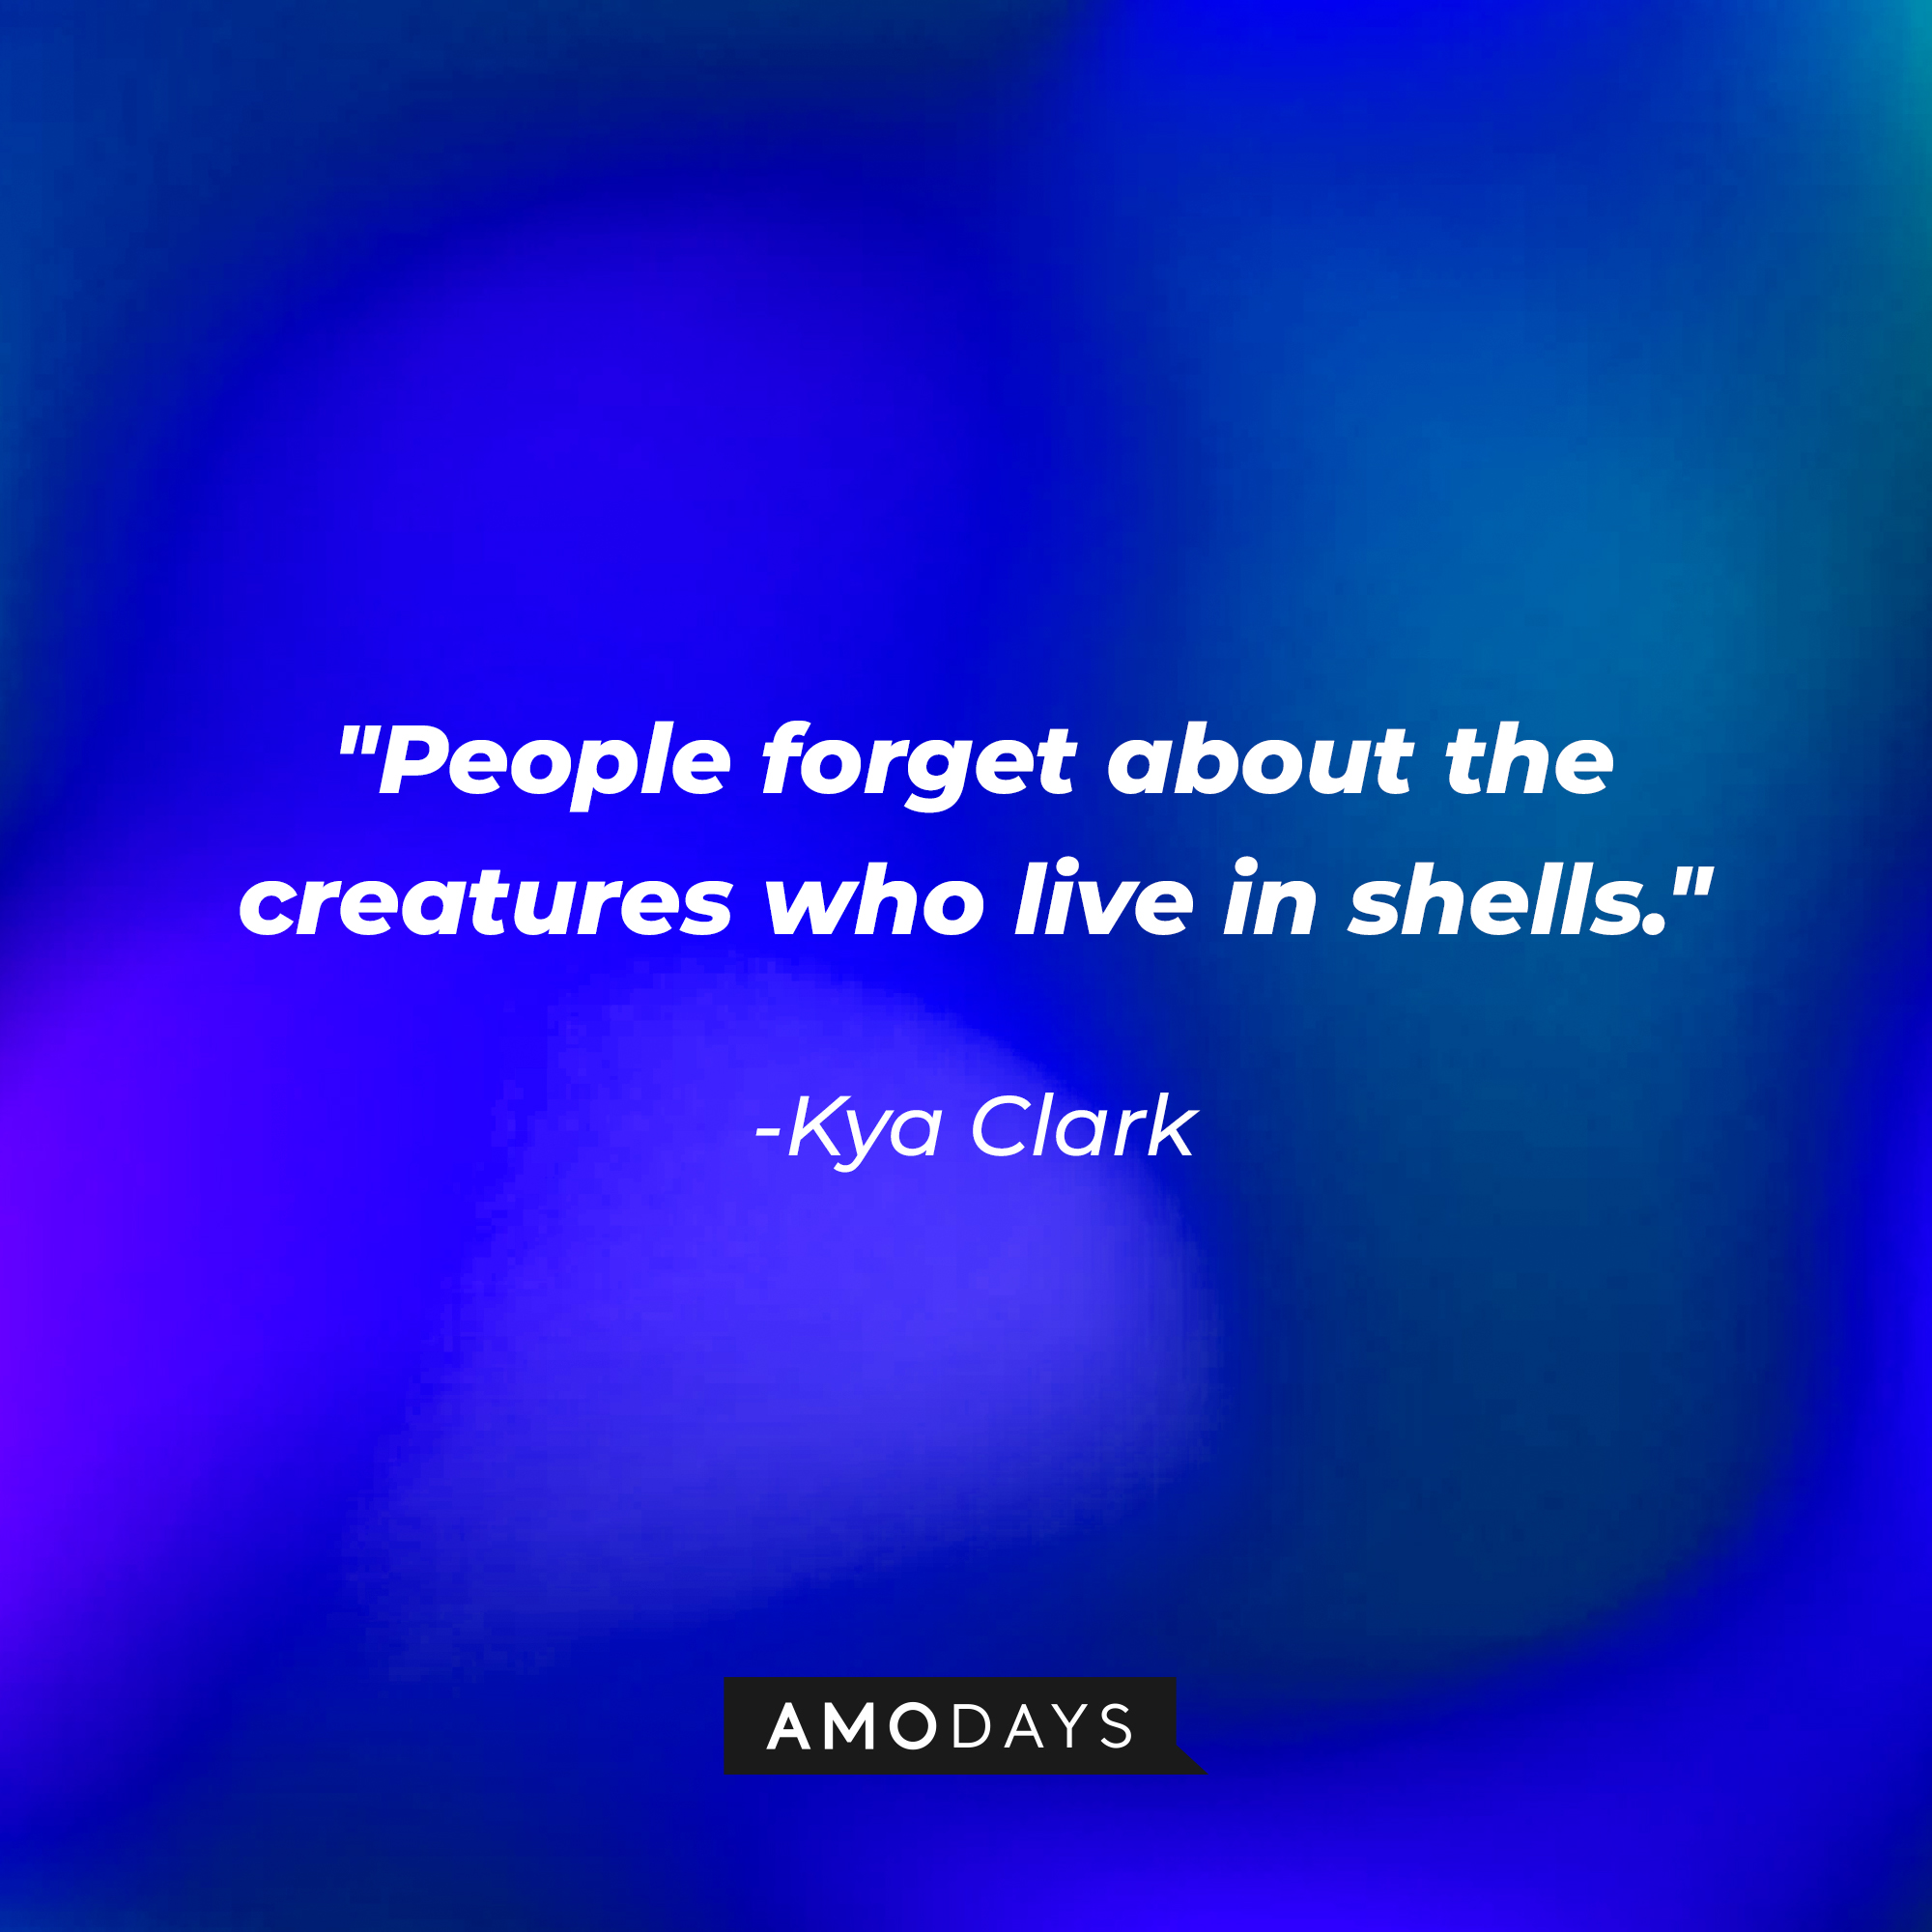 Kya Clark’s quote: "People forget about the creatures who live in shells." │Source: AmoDays